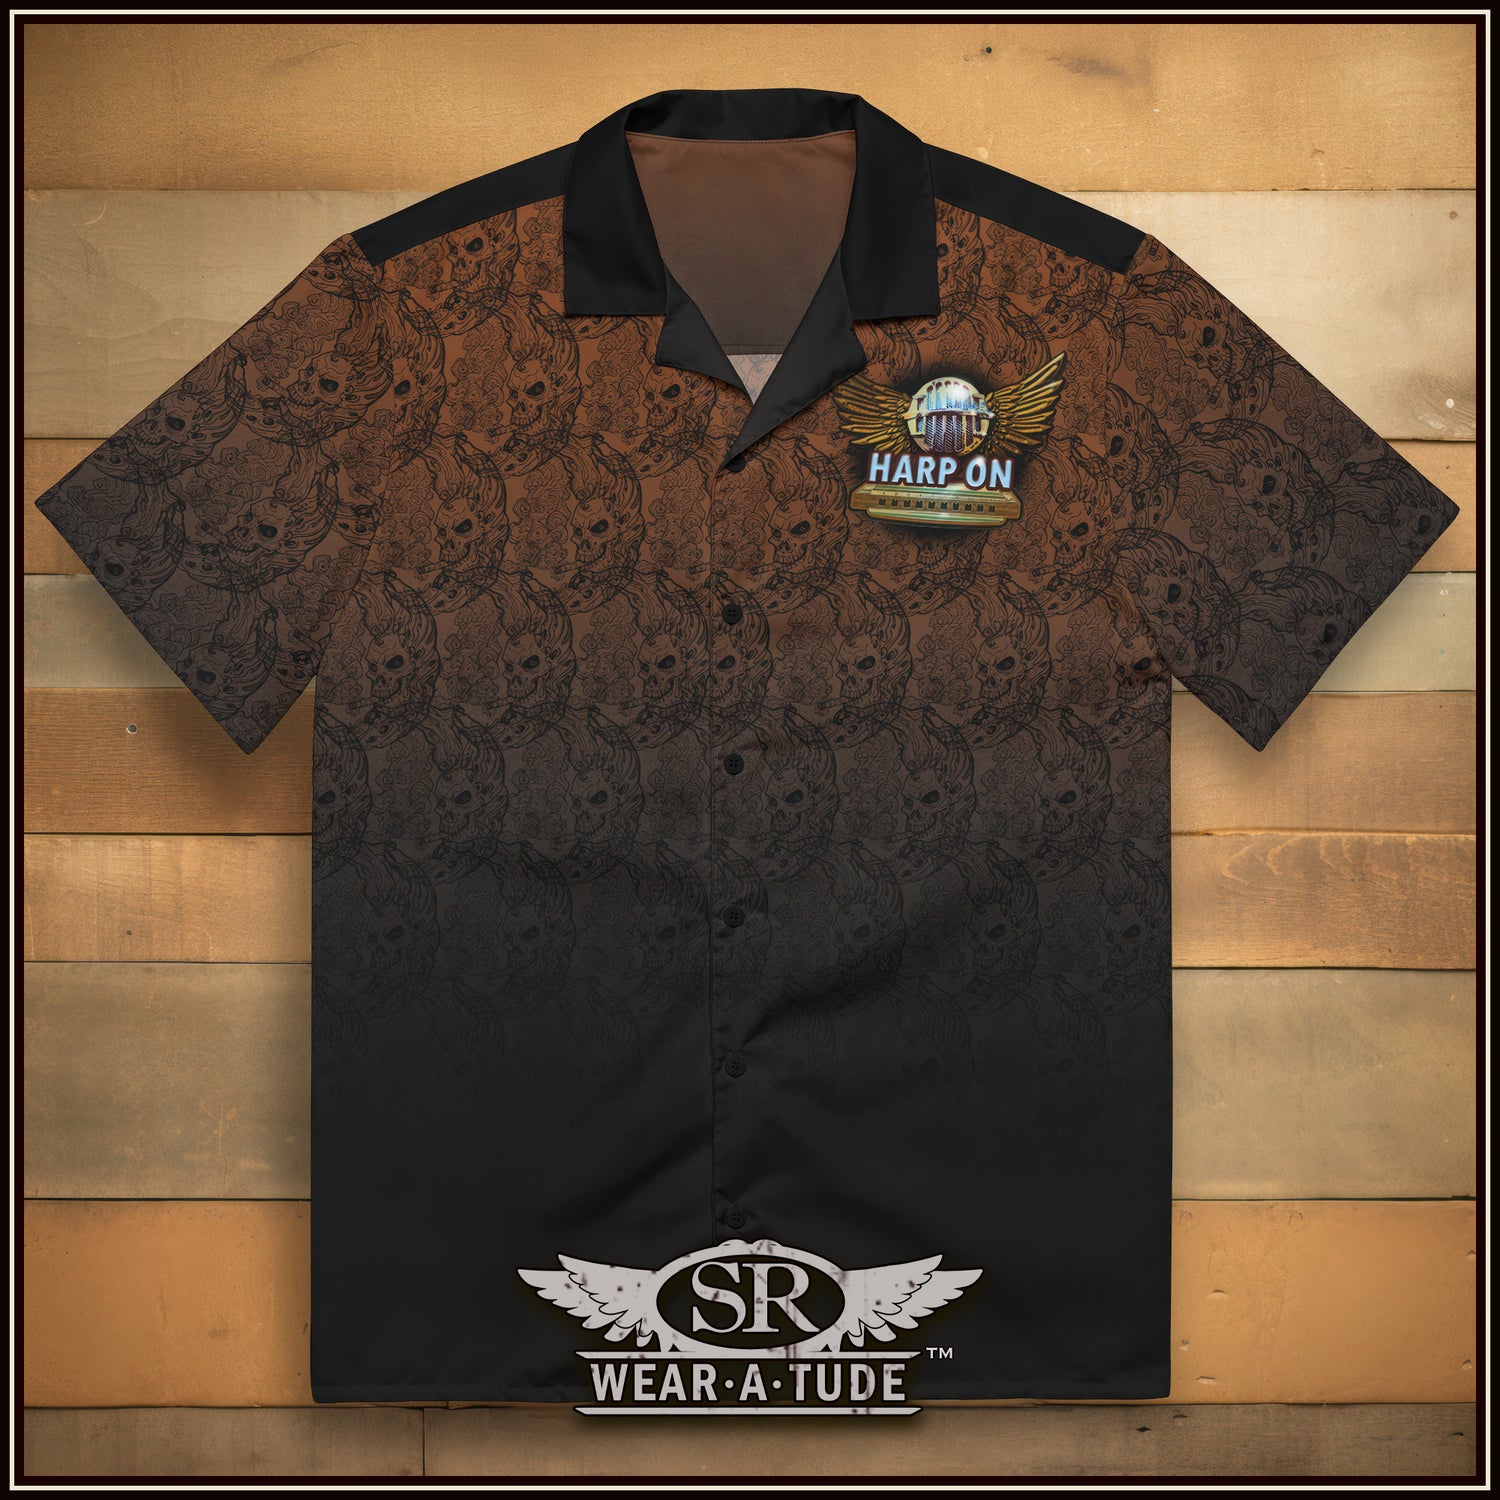 Our Harp On brand looks slick on this killer button up short sleeve shirt. The signature style graphics is evident with the Smoking Moon-skull pattern on a rich deep sienna brown, trimmed with a charcoal trim. Smoking Moon tattoo design